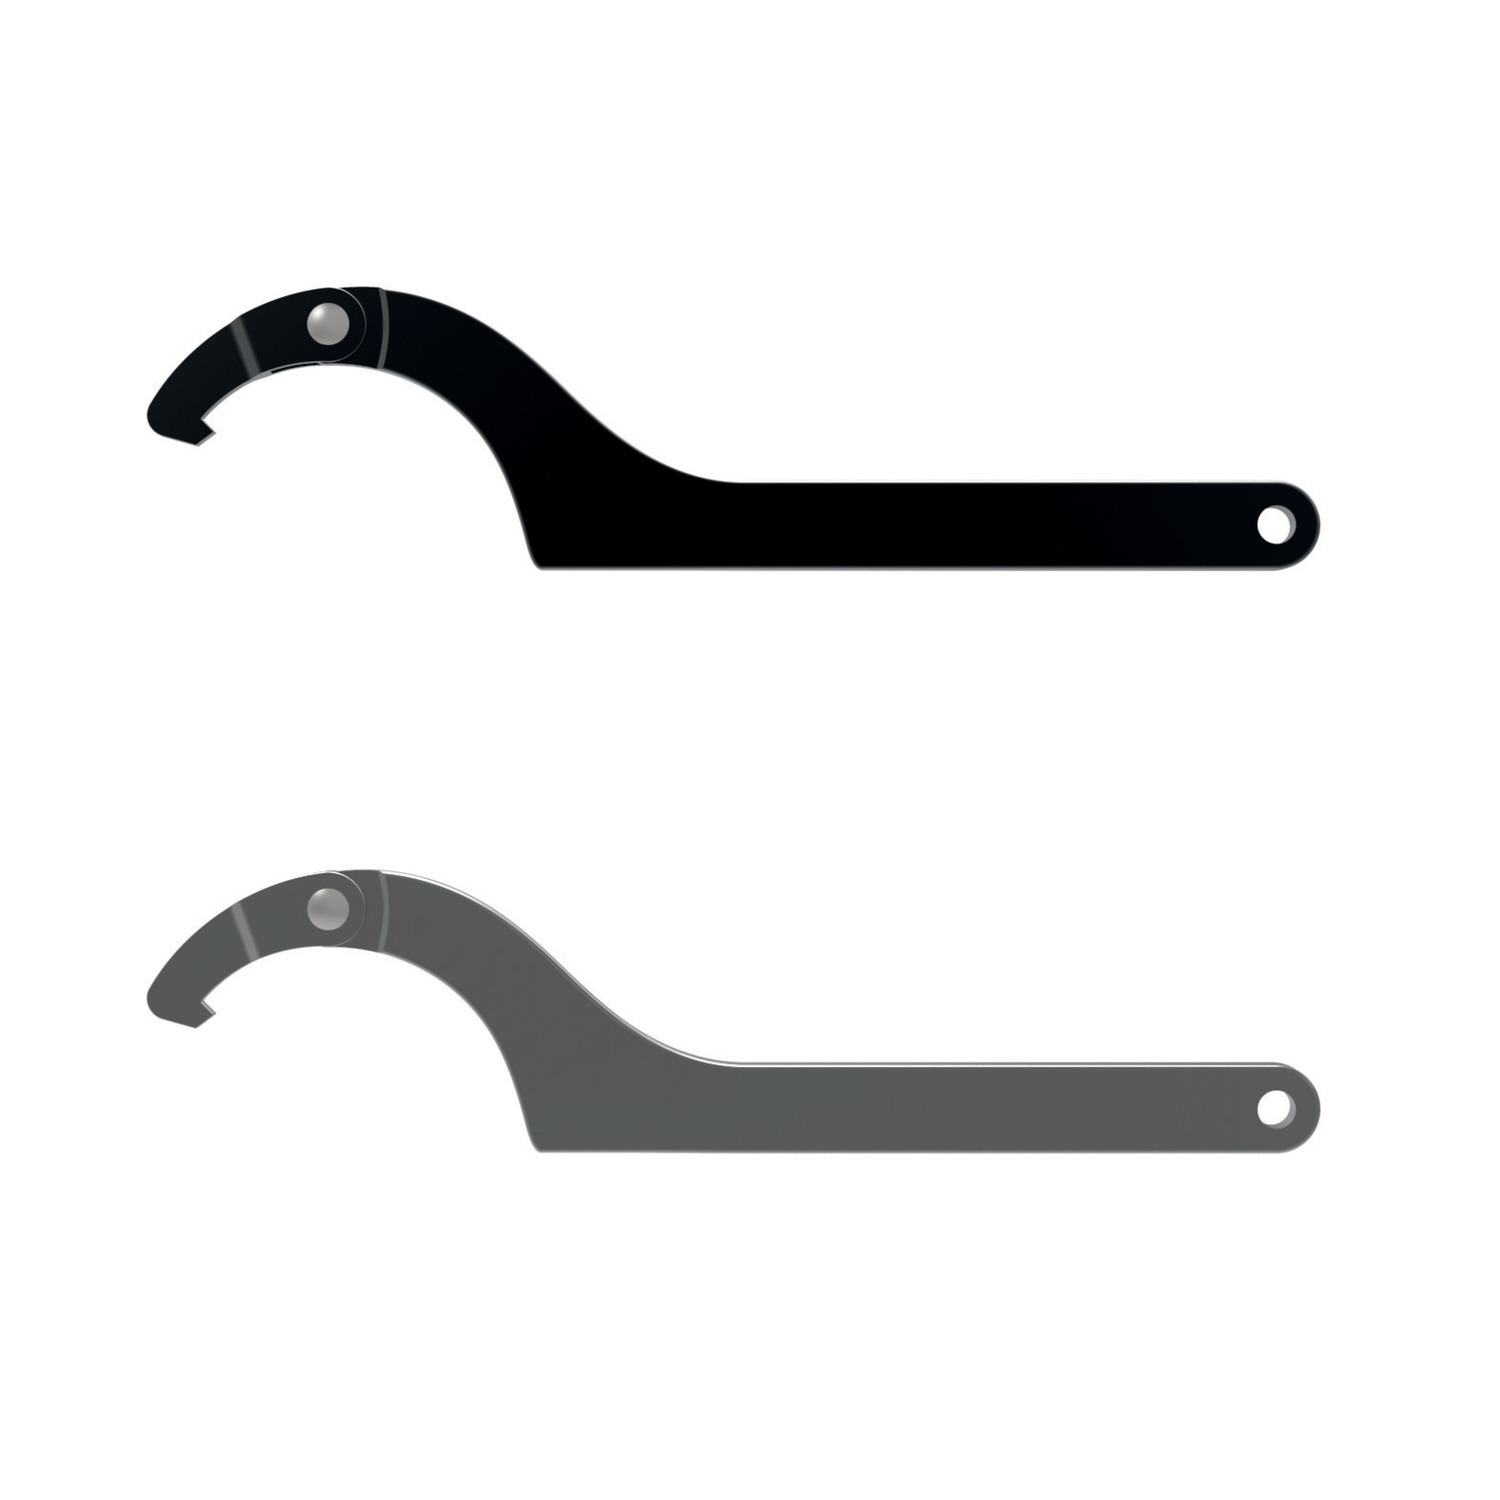 95100 Hook Spanners - with Hook Nose